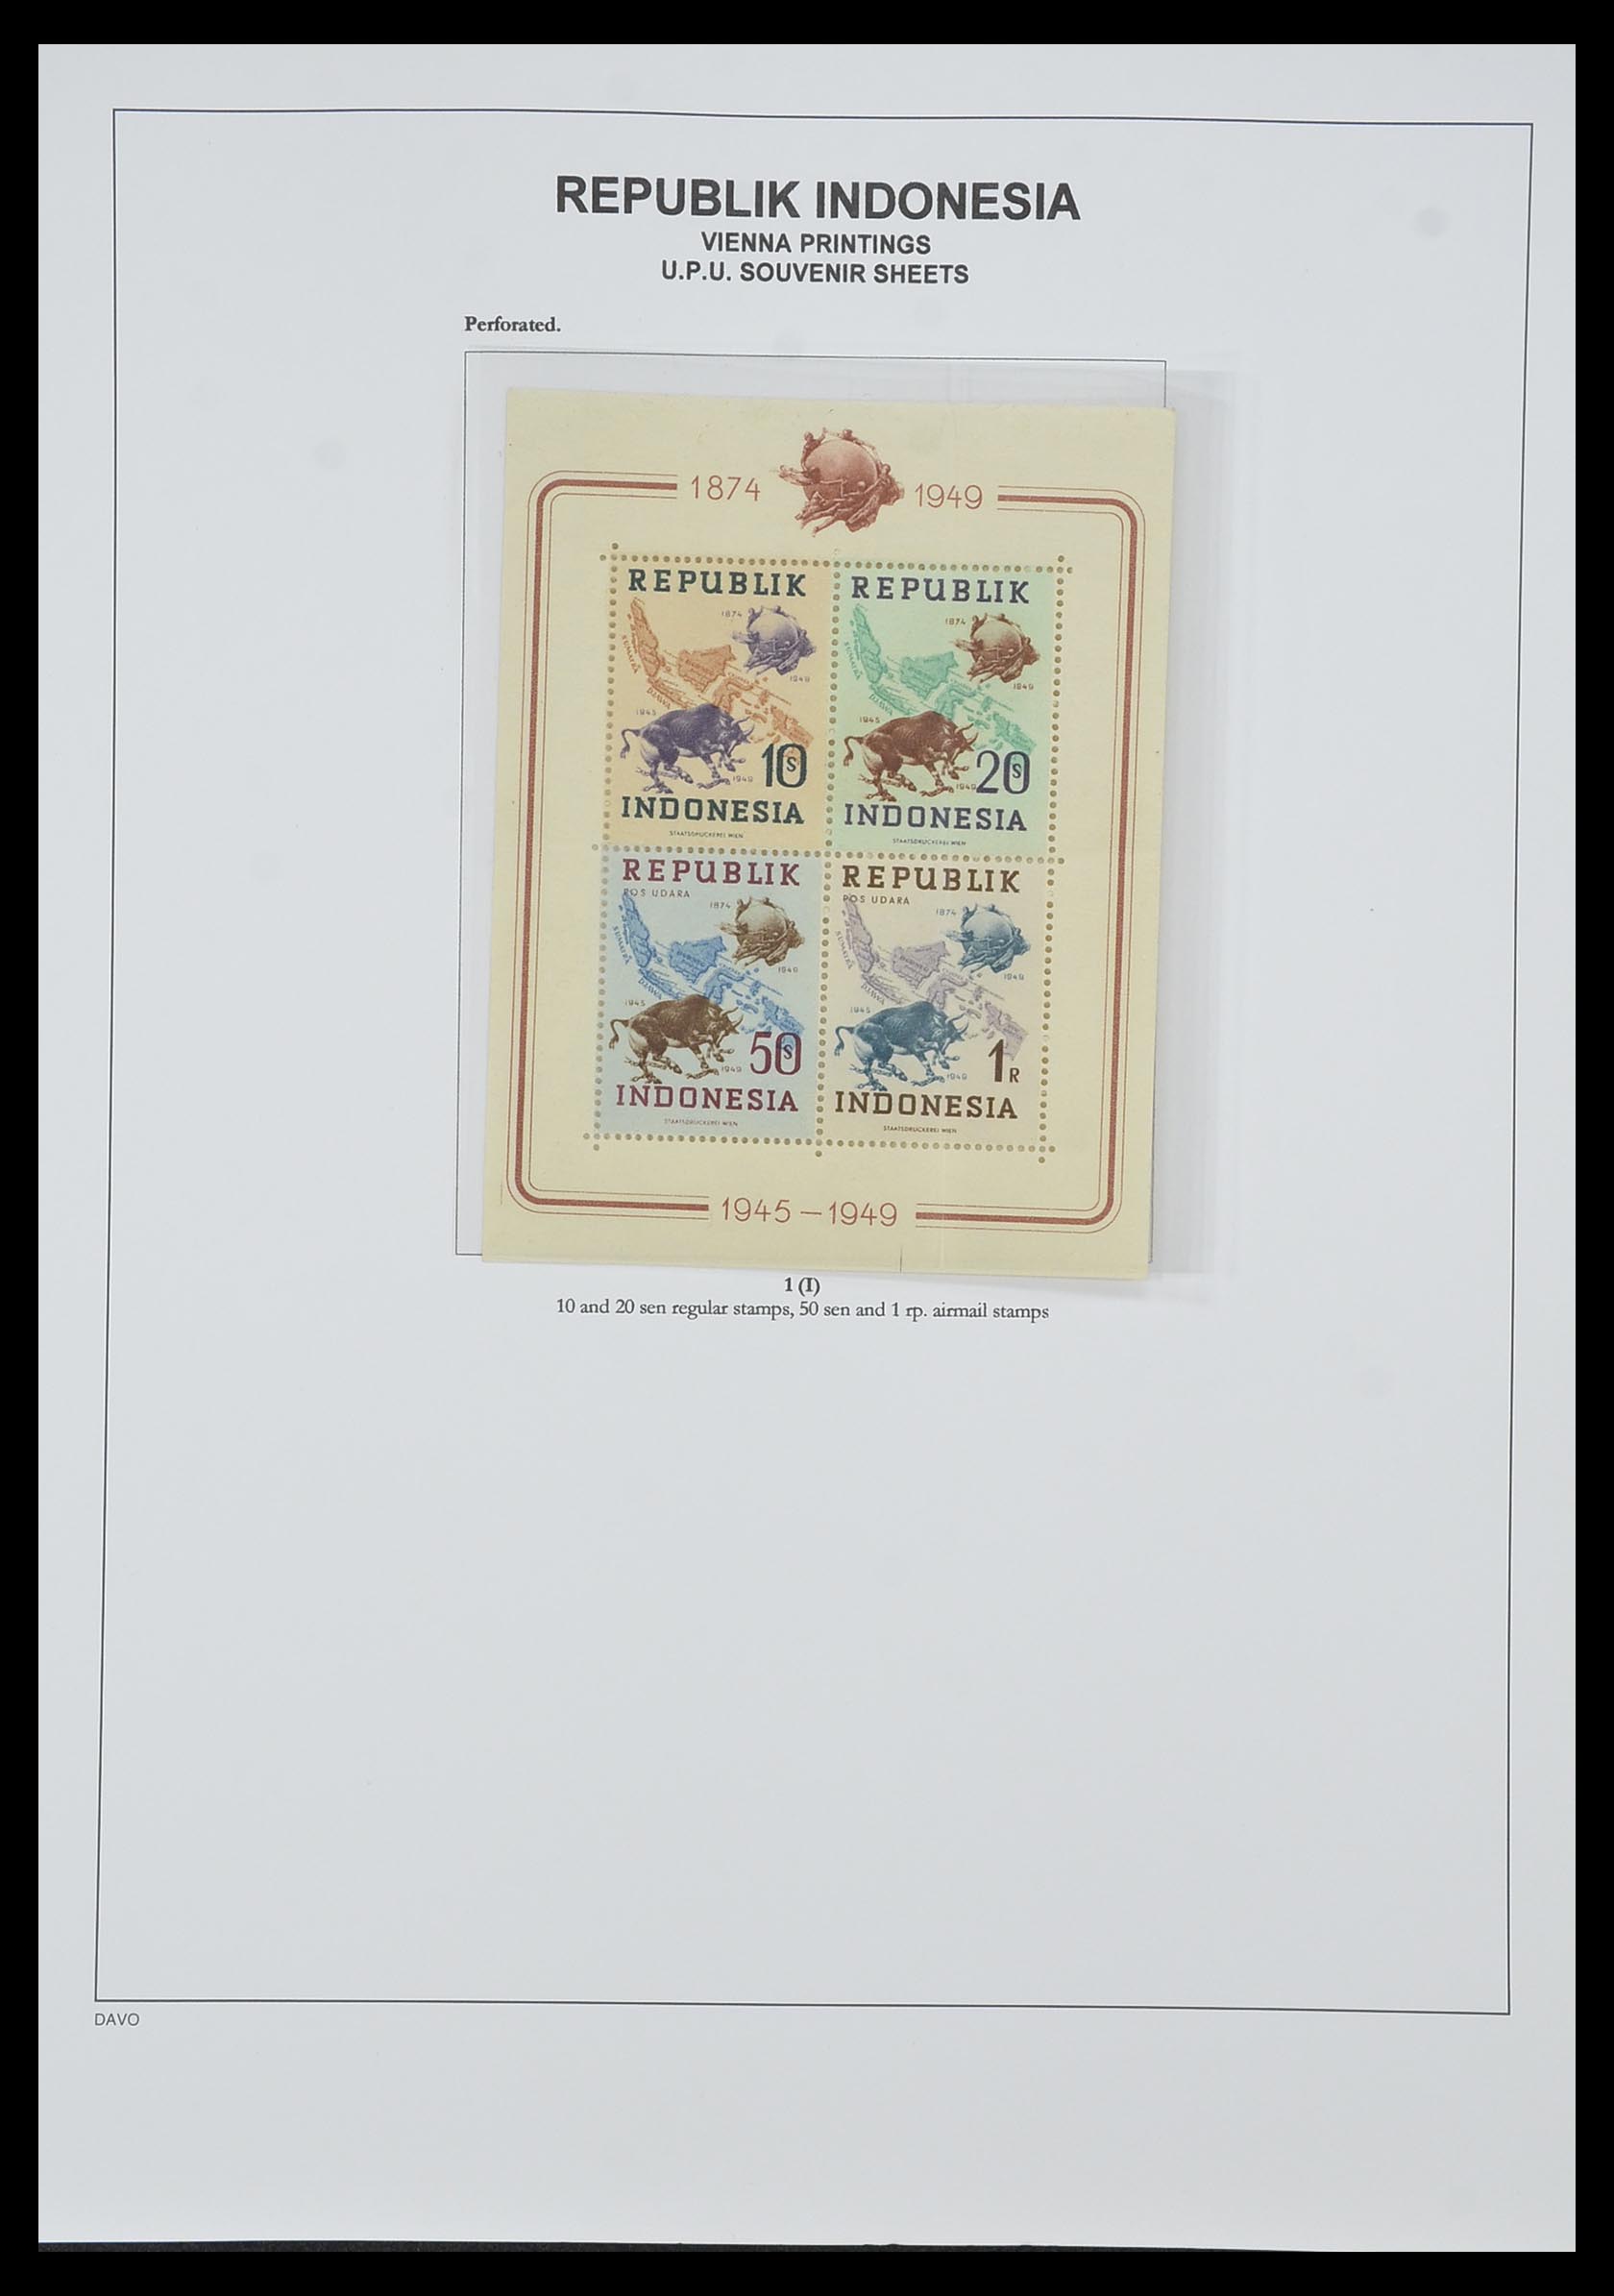 33988 046 - Stamp collection 33988 Vienna printings Indonesia.